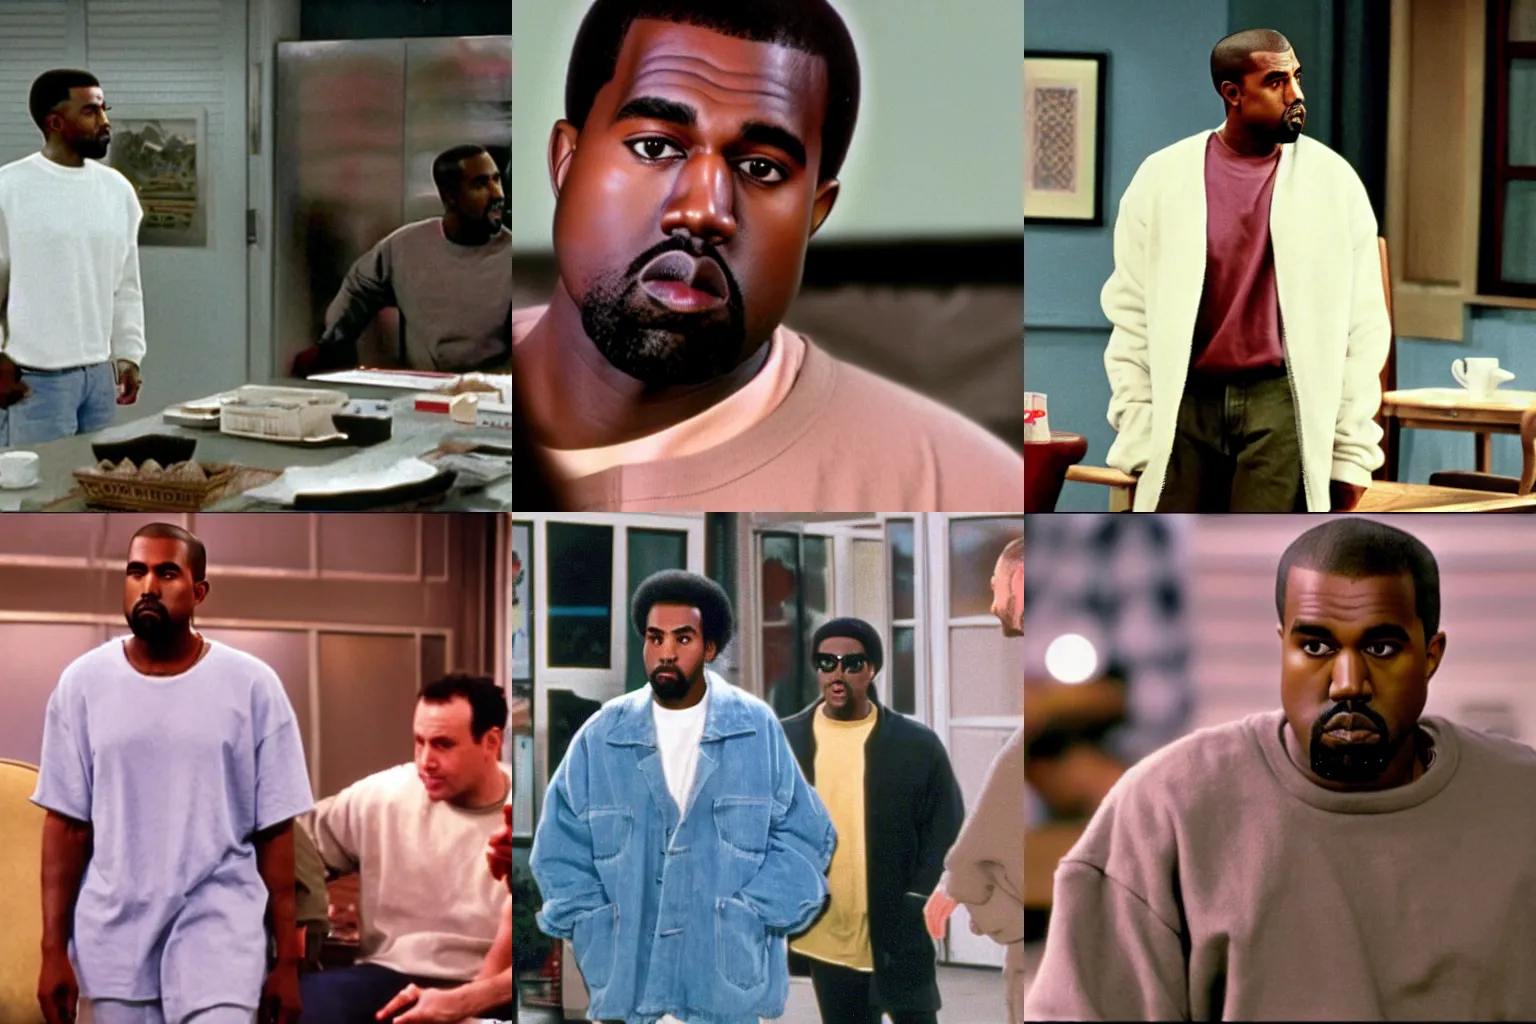 Prompt: A Still of Kanye West starring as a guest character in Seinfeld (1996)